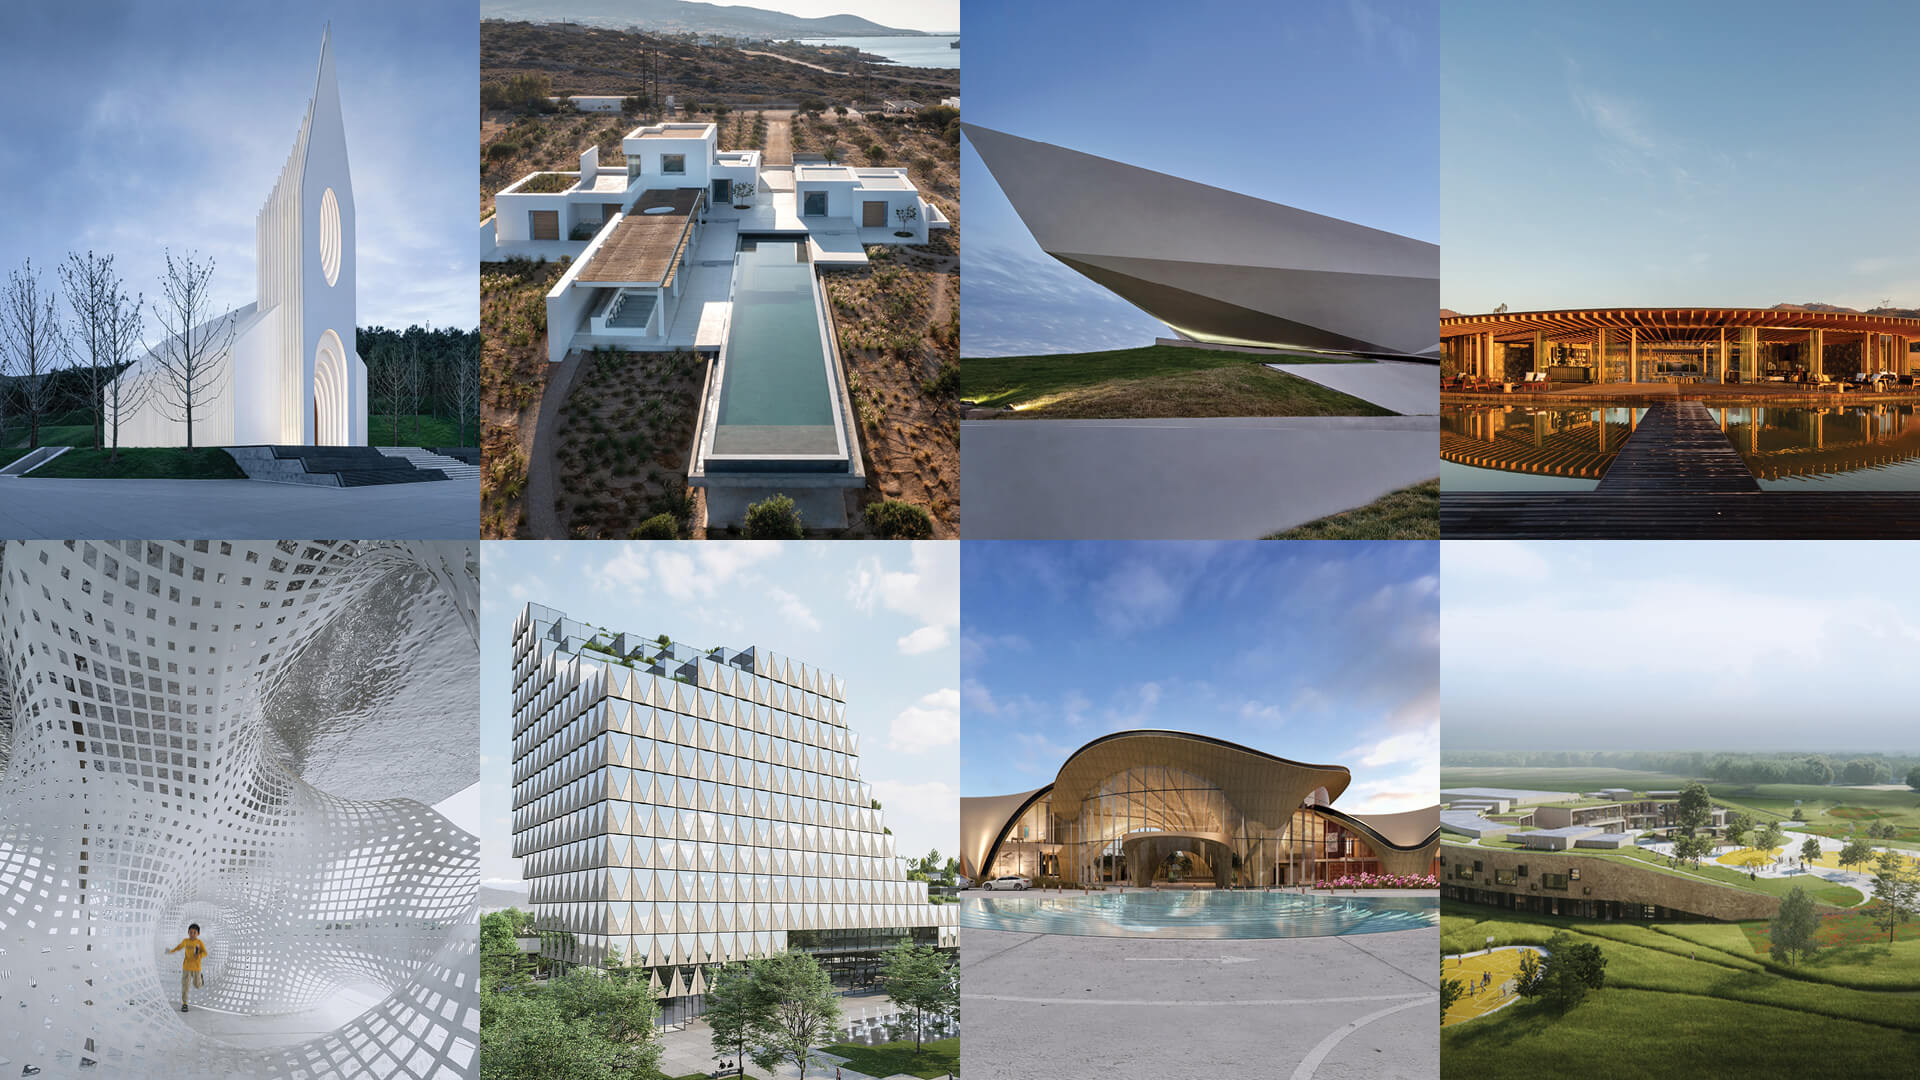 World Architecture Festival announces the shortlisted entries for 2022